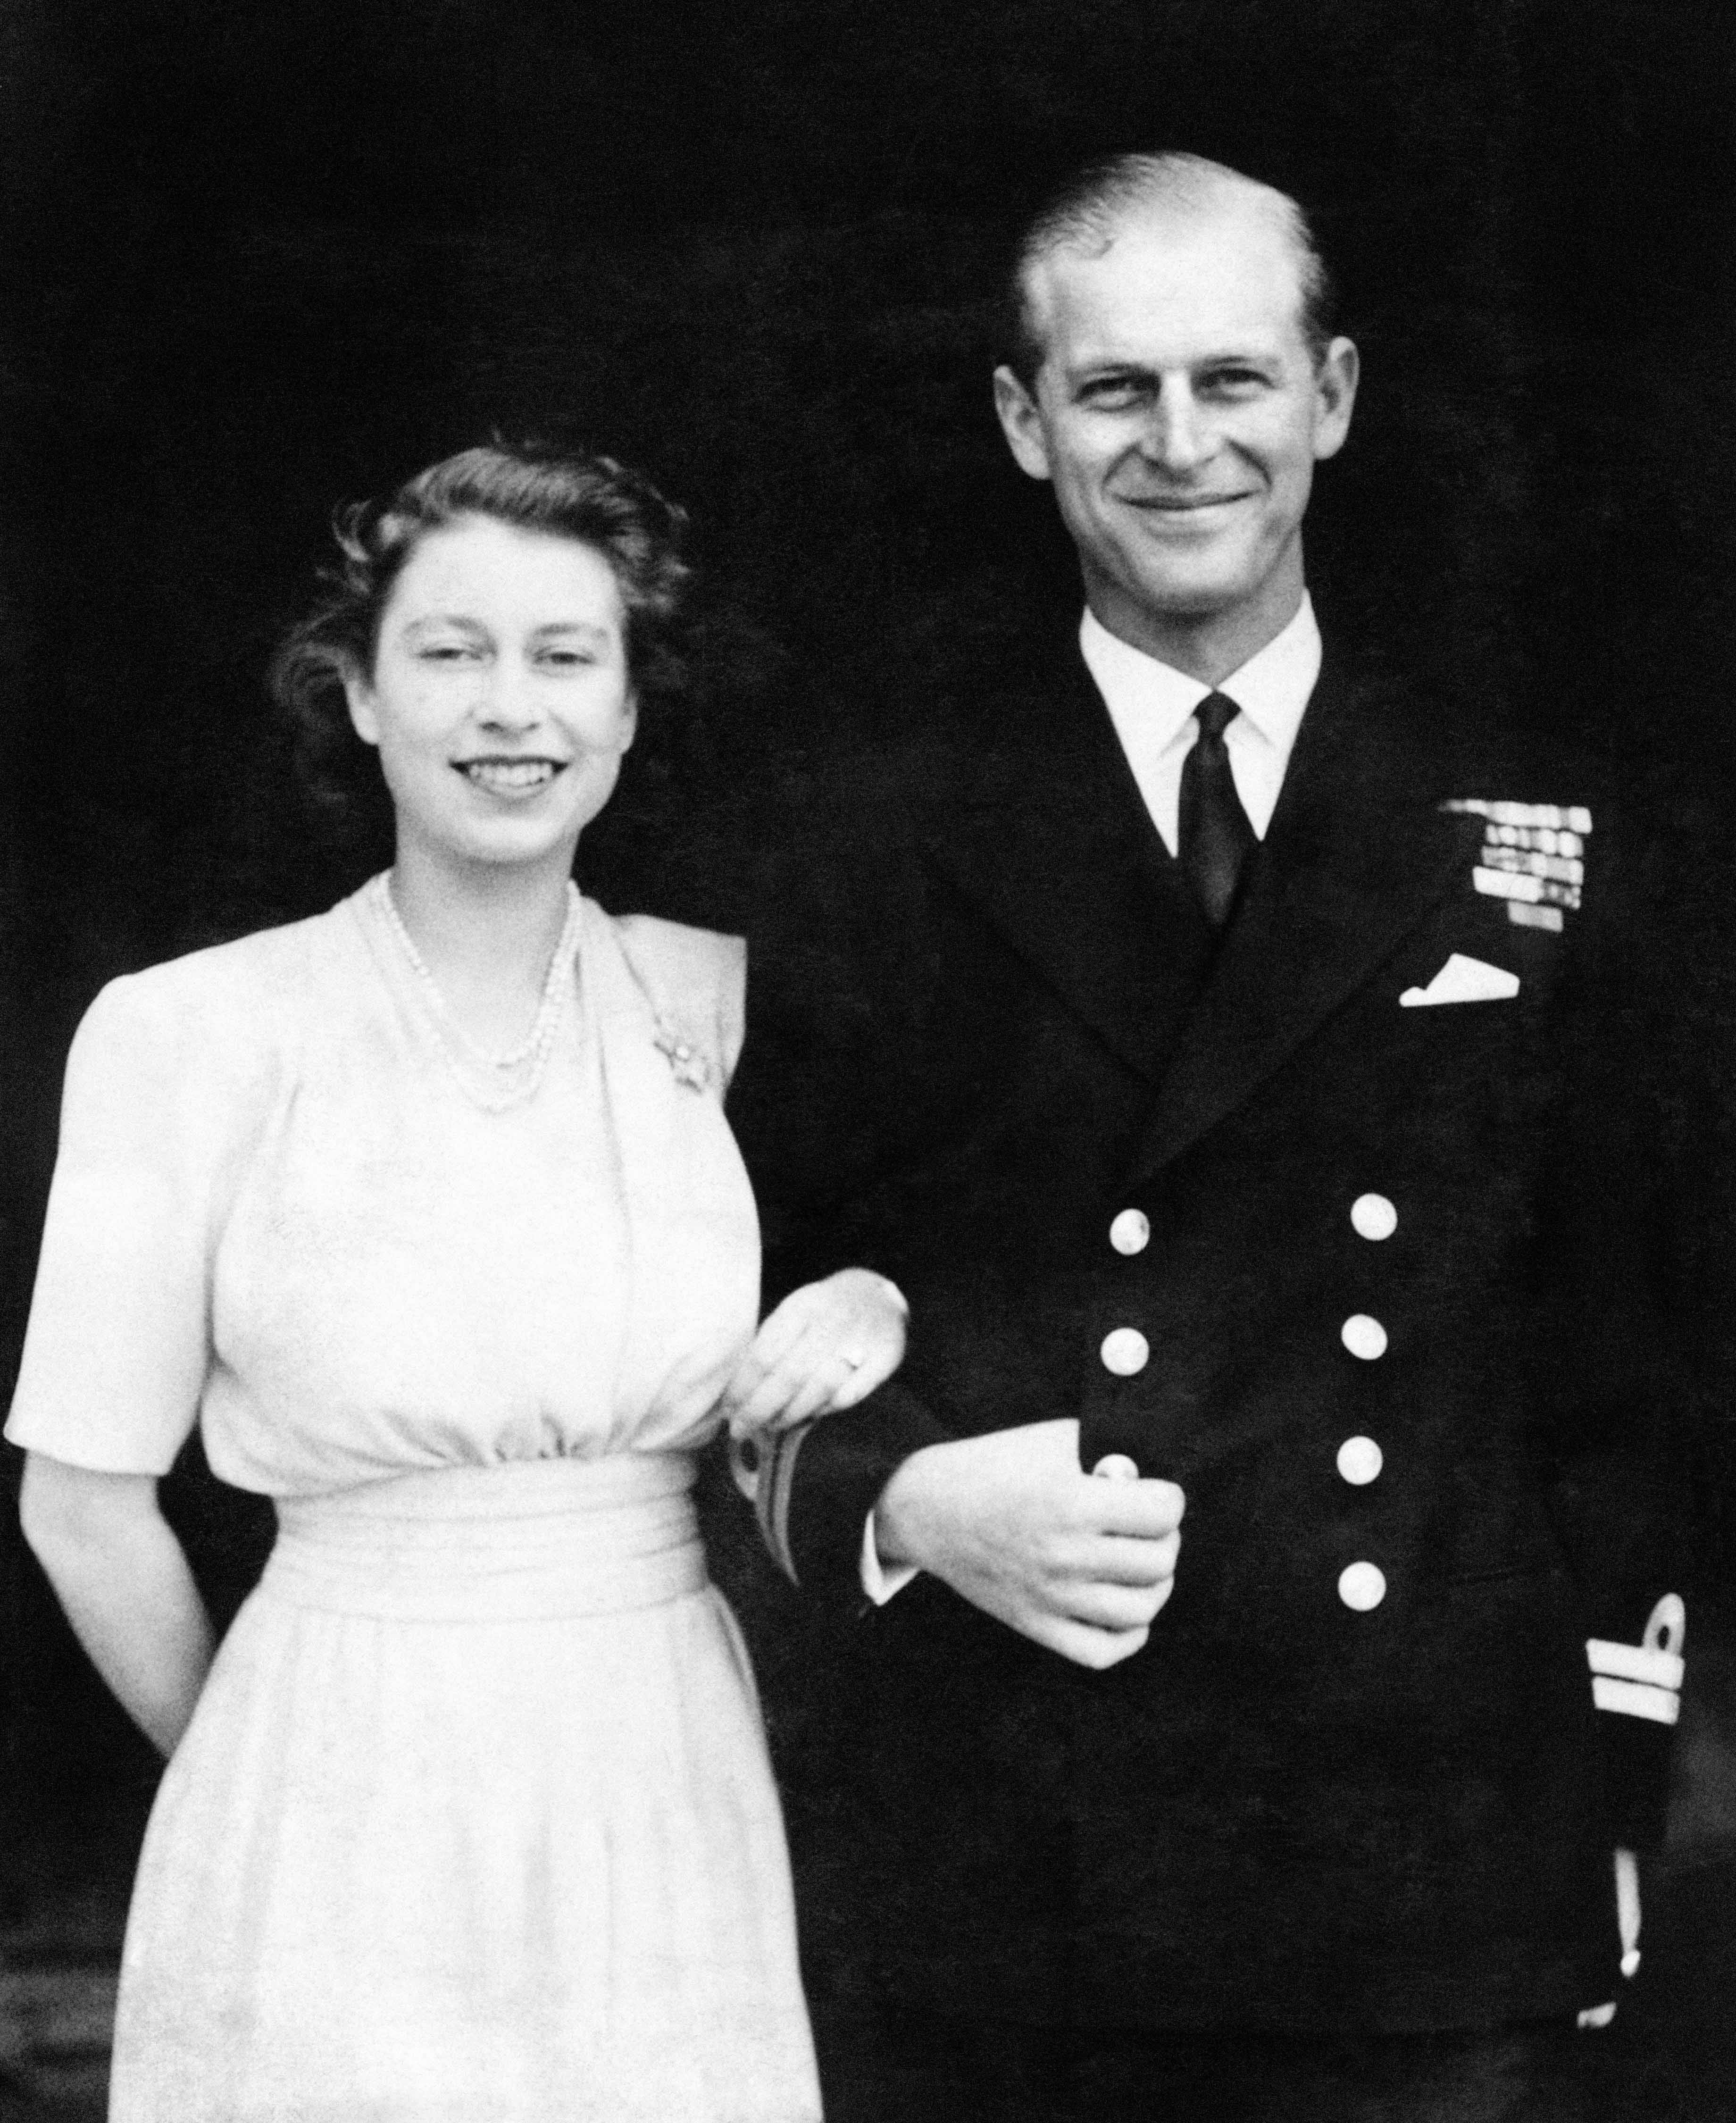 10 July 1947: Princess Elizabeth and Lieut. Philip Mountbatten, whose engagement was announced, pose for their first engagement pictures at Buckingham Palace